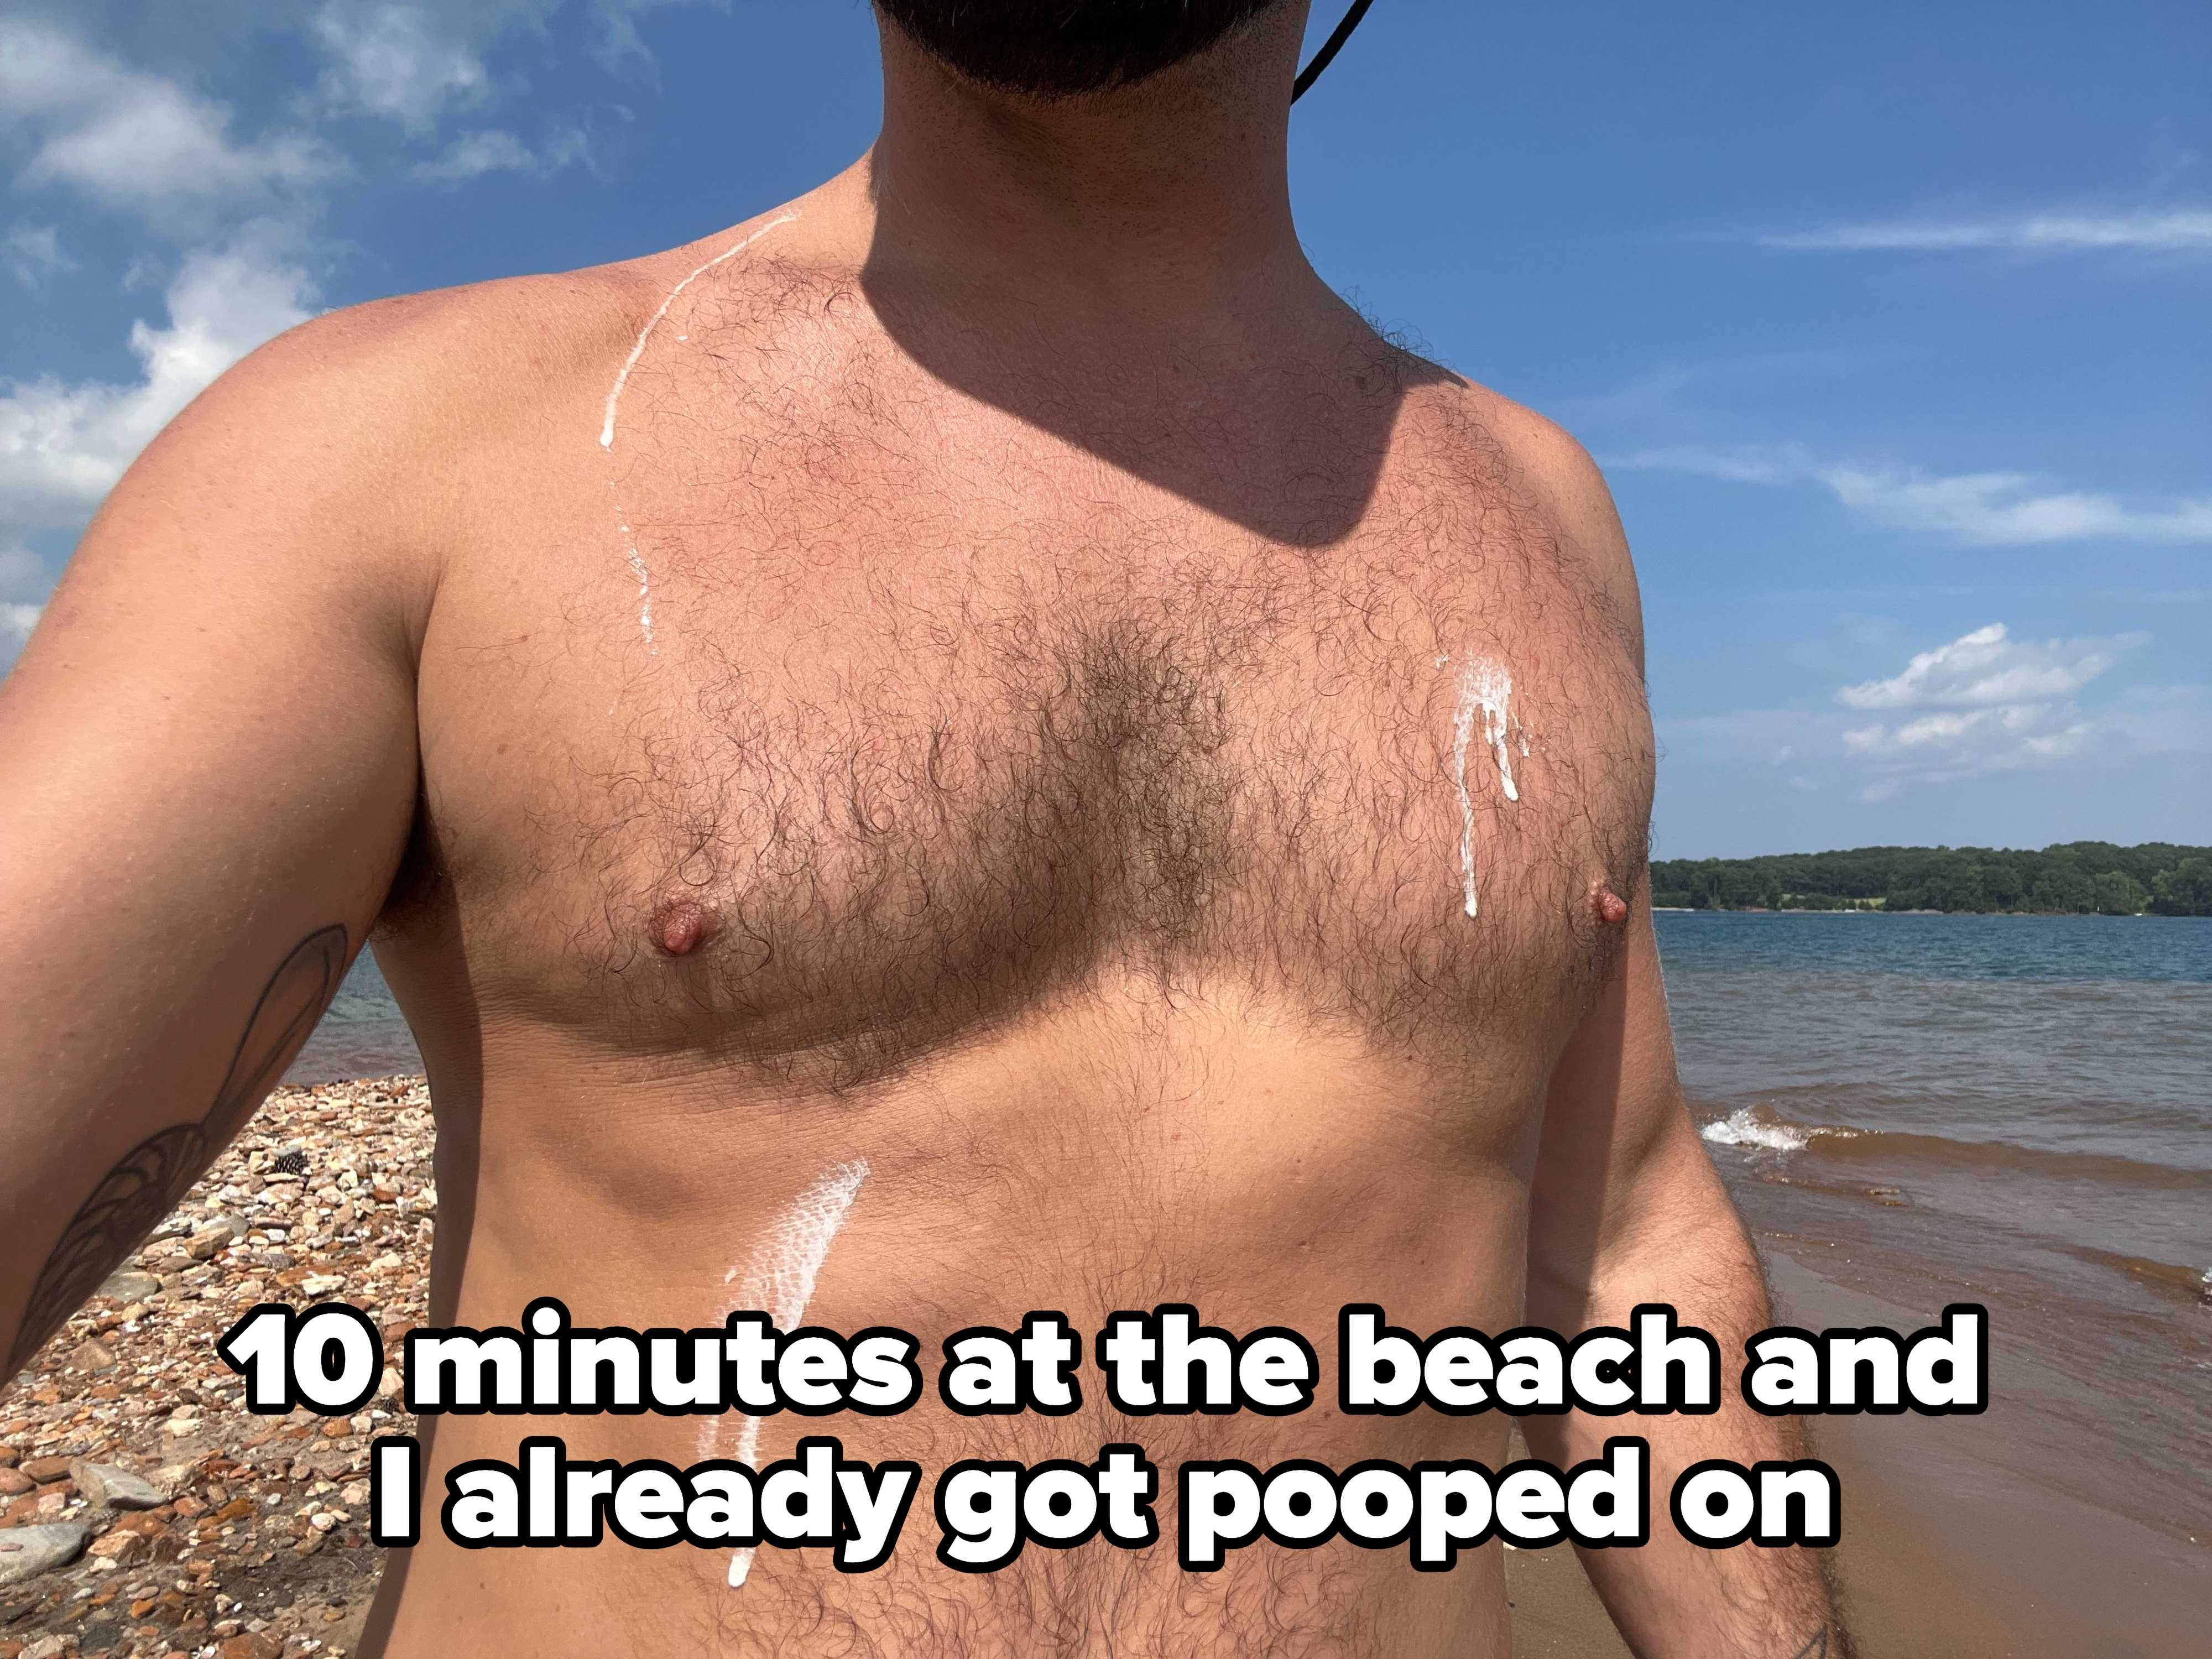 A man with bird poop on his chest